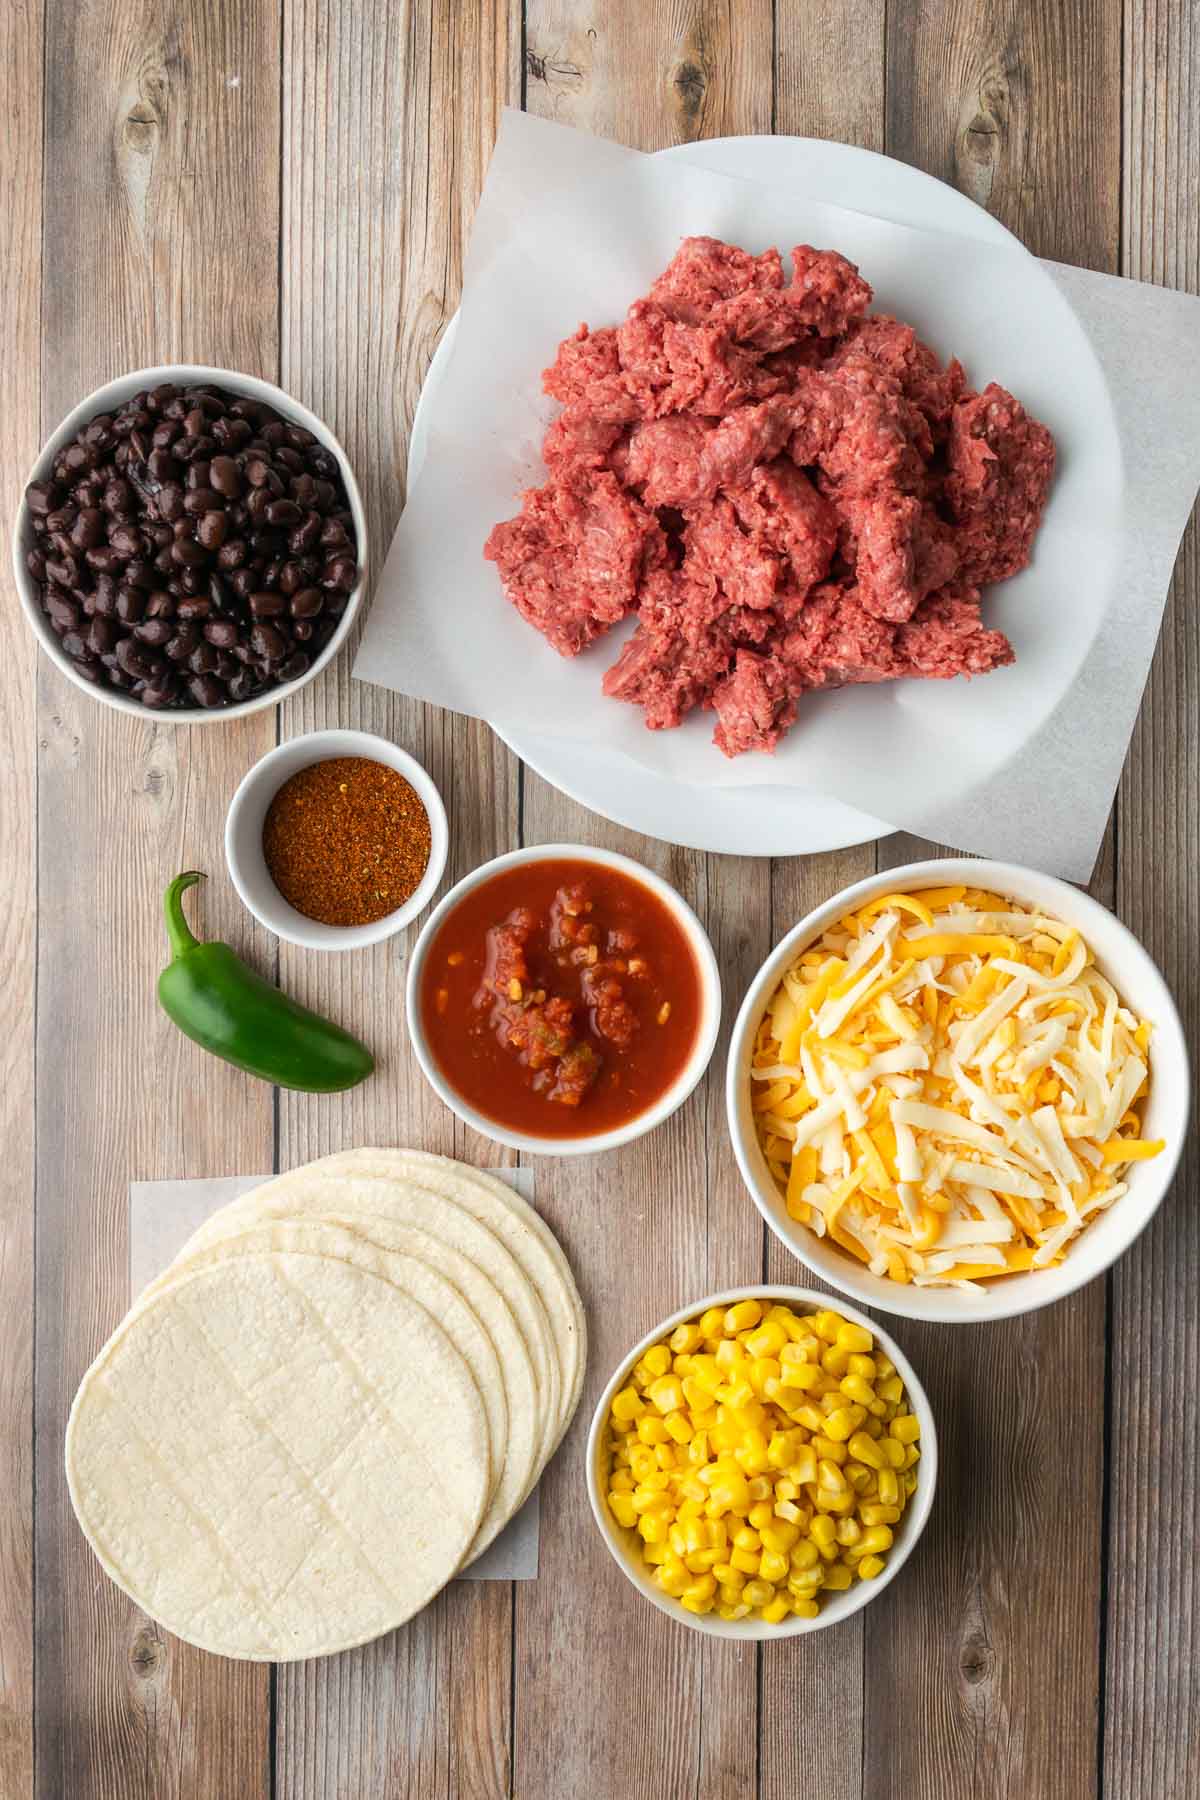 Ingredients for Mexican lasagna including tortillas, corn, salsa, cheese, ground beef, and black beans.